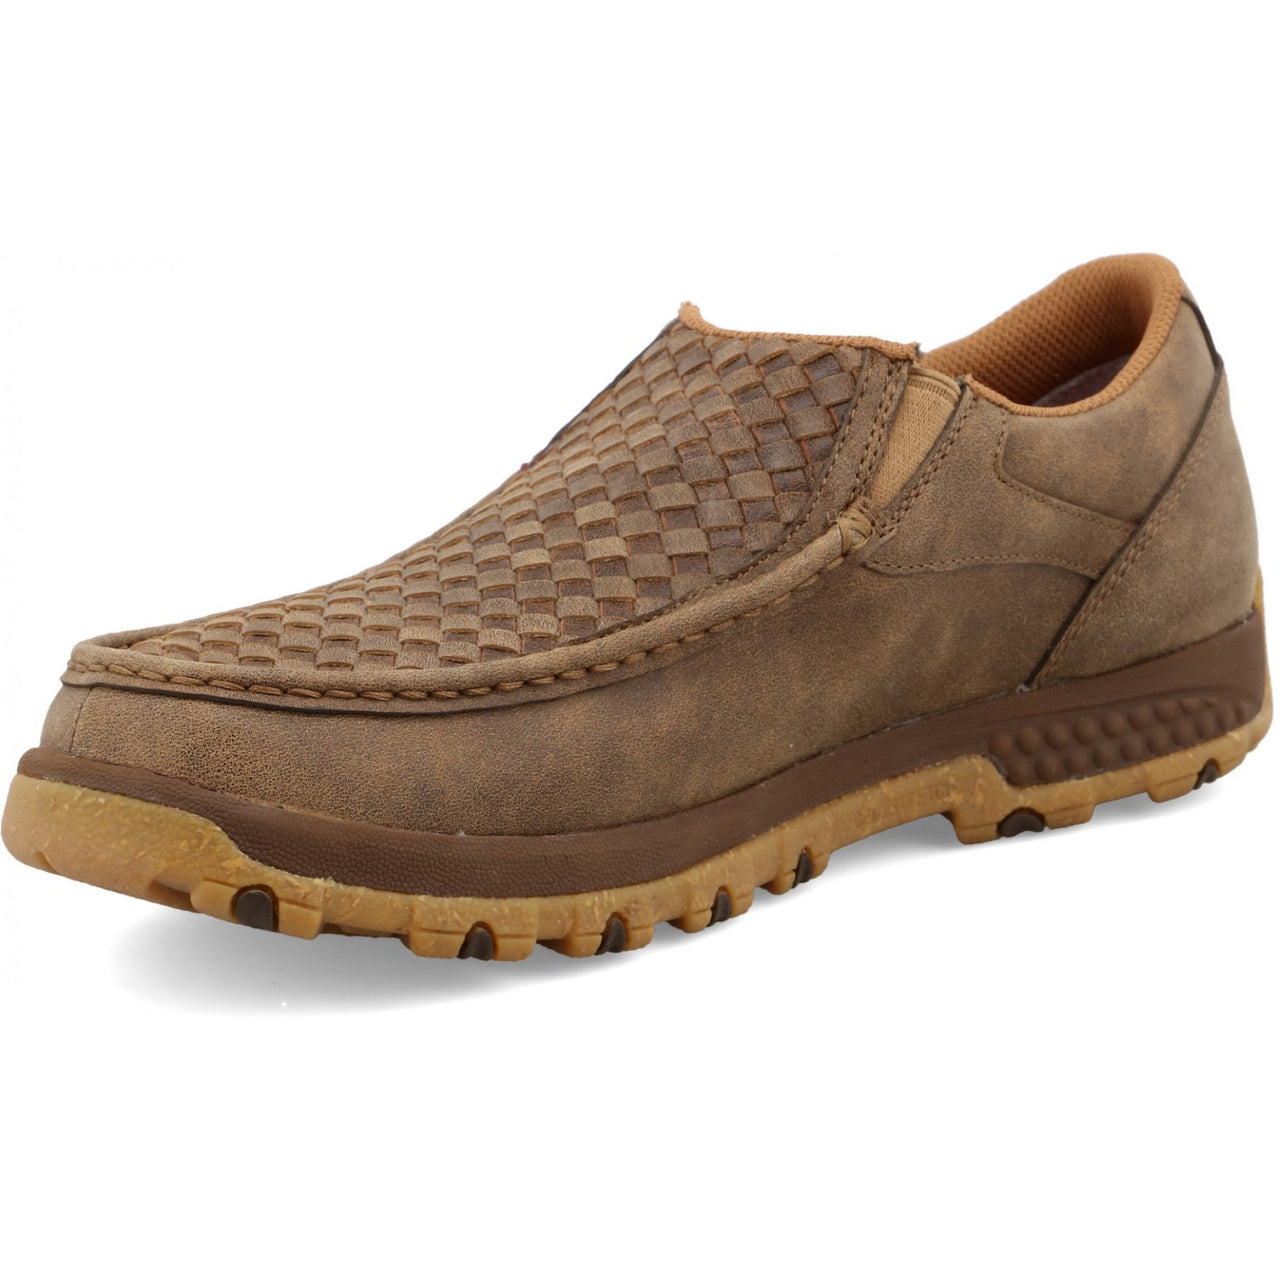 Twisted X Men's Cellstretch Slip-On Driving Moc D Toe Shoes - Brown